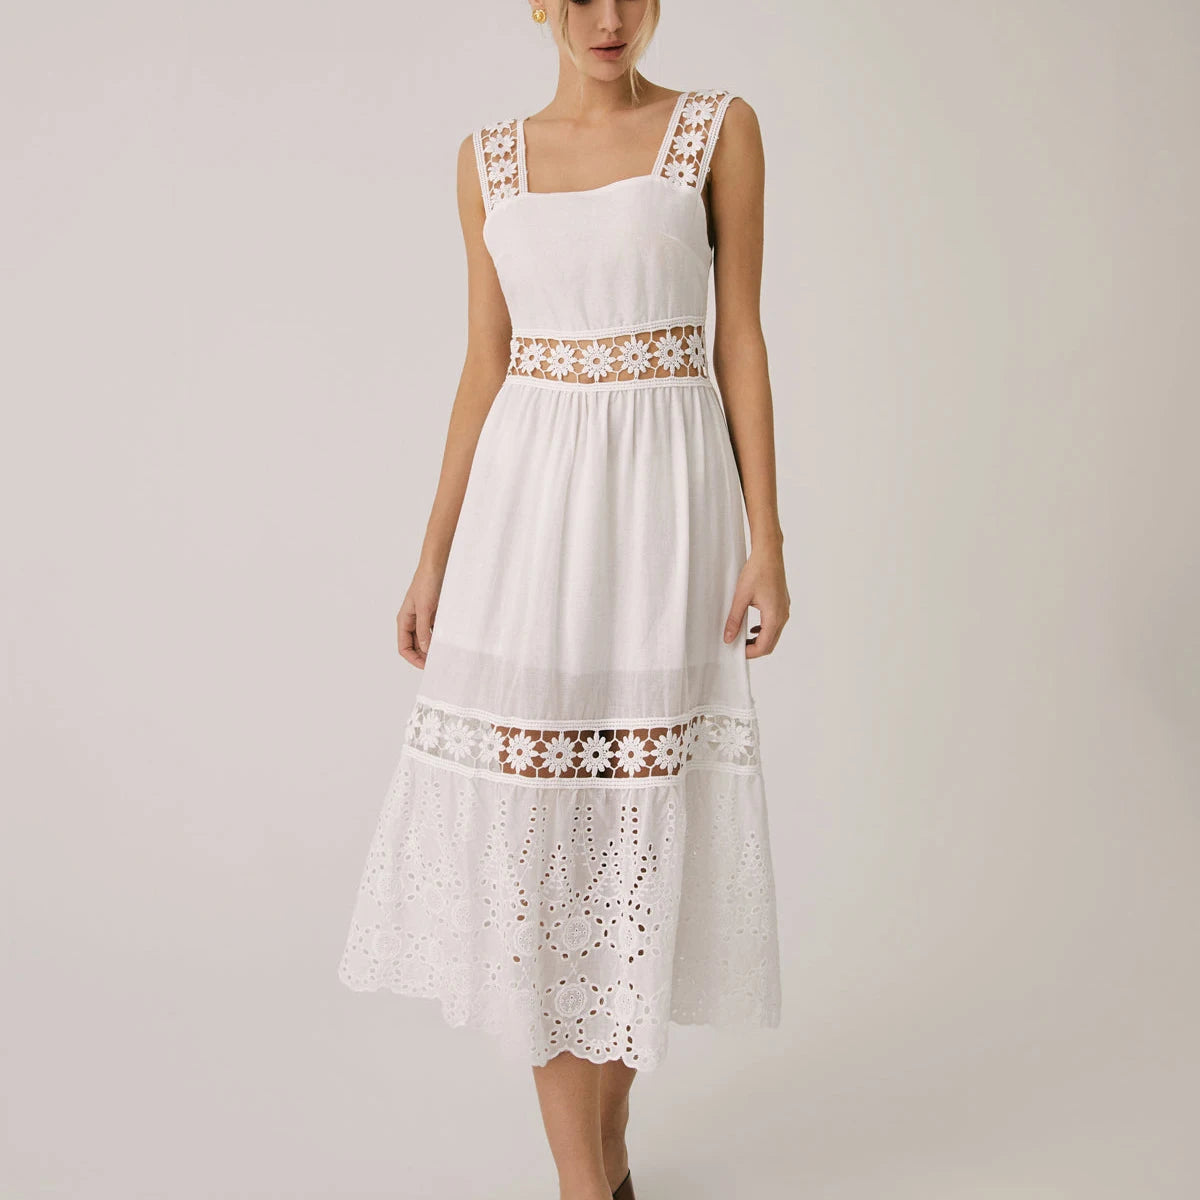 Vacation Dresses- Summer Romance Women's Fit & Flare Embroidered Midi Dress for Garden Parties- Embroidered Dress- Chuzko Women Clothing